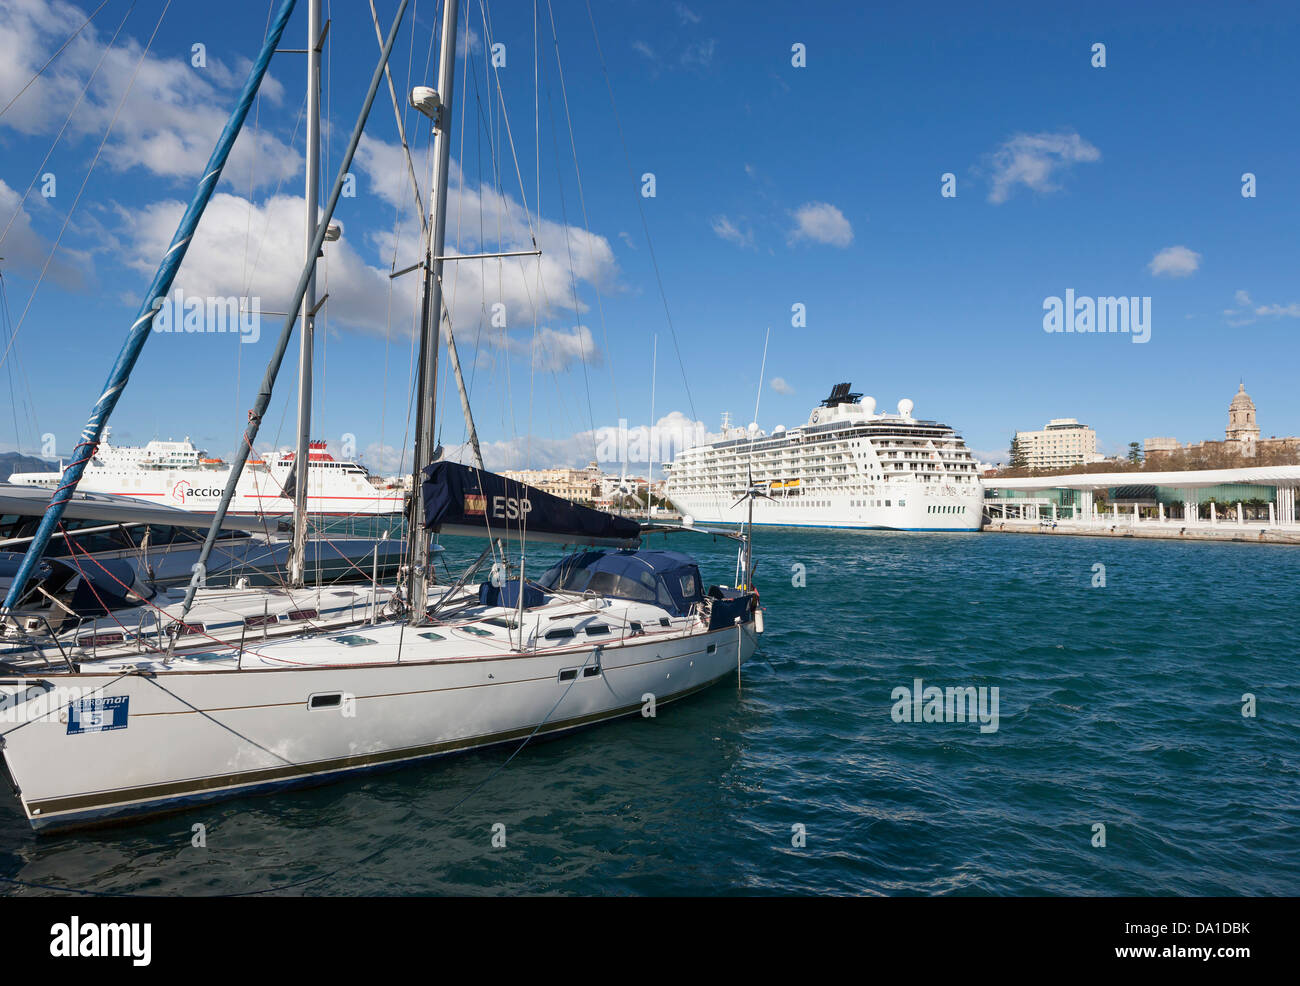 Spain, Malaga, View of cruise liner at port Stock Photo